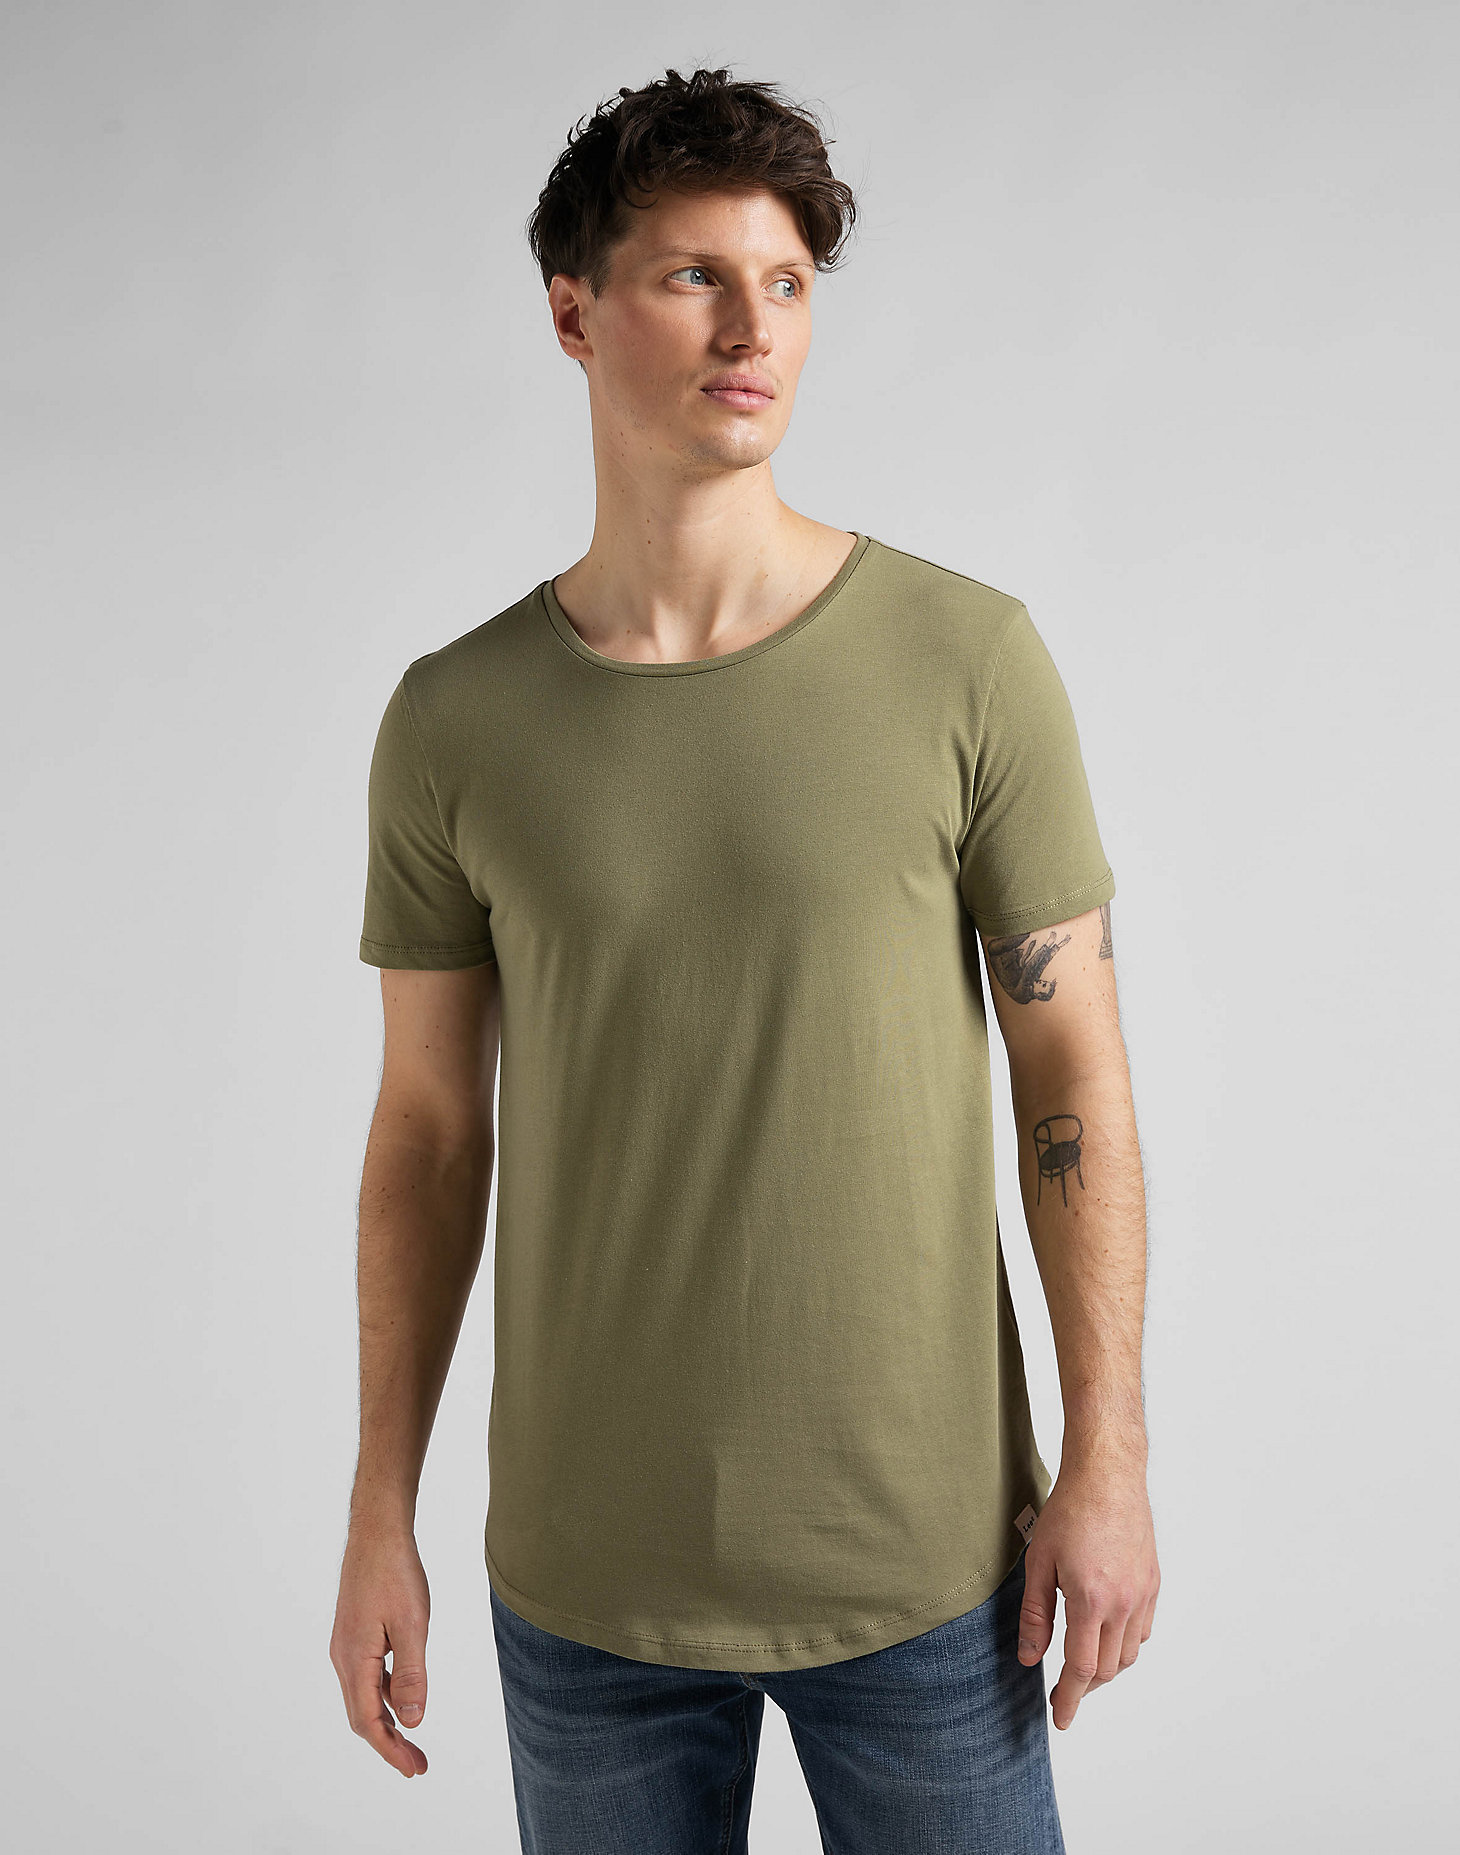 Shaped Tee in Brindle Green main view